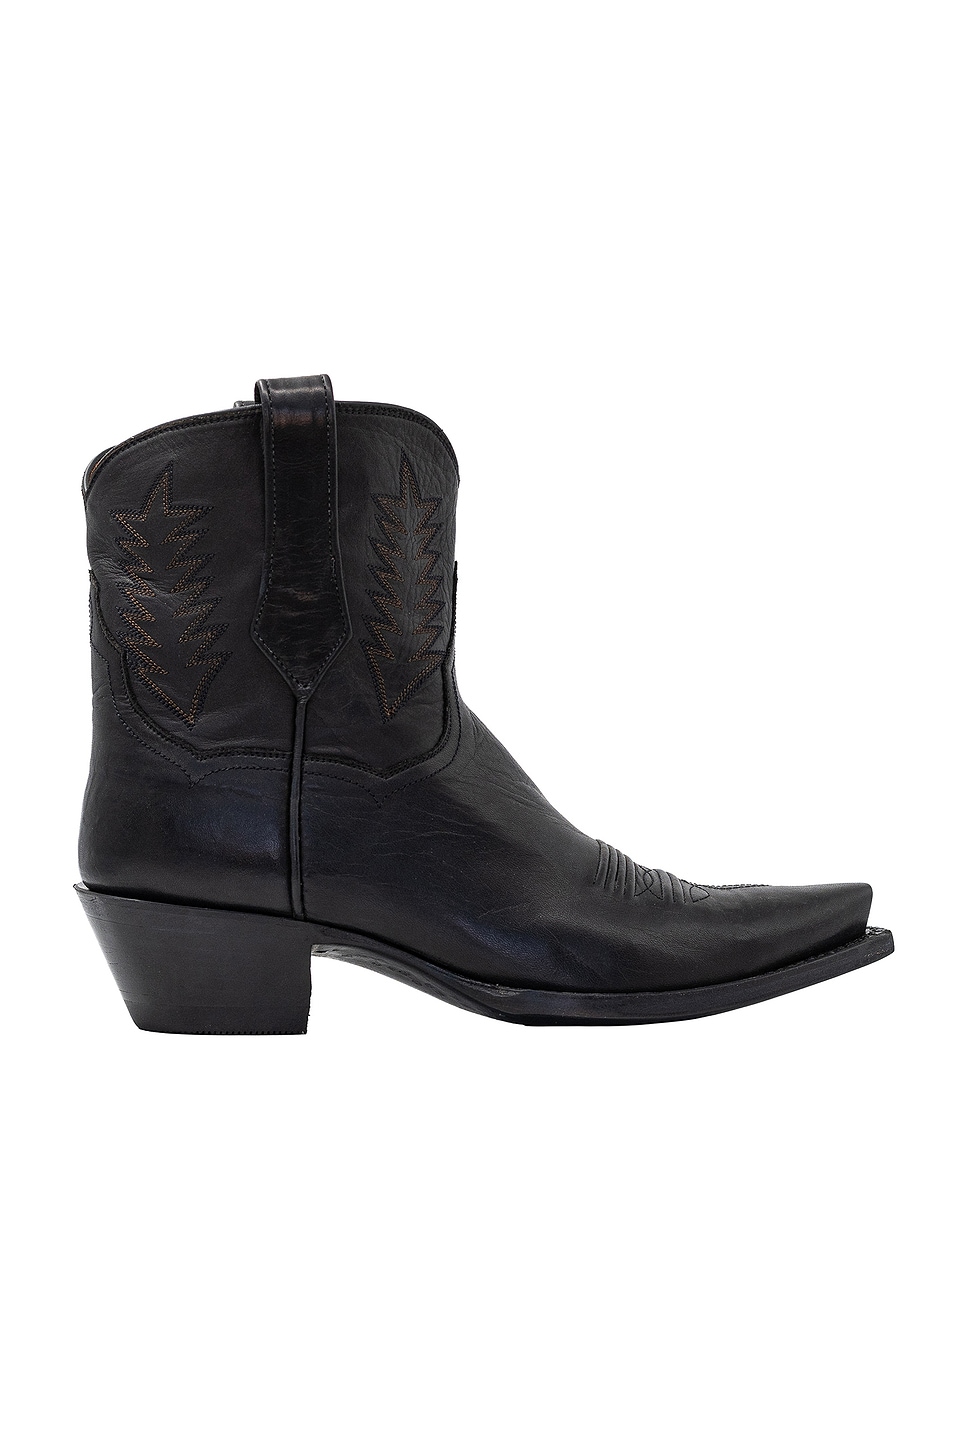 Image 1 of Kemo Sabe Lizzy Boot in Black